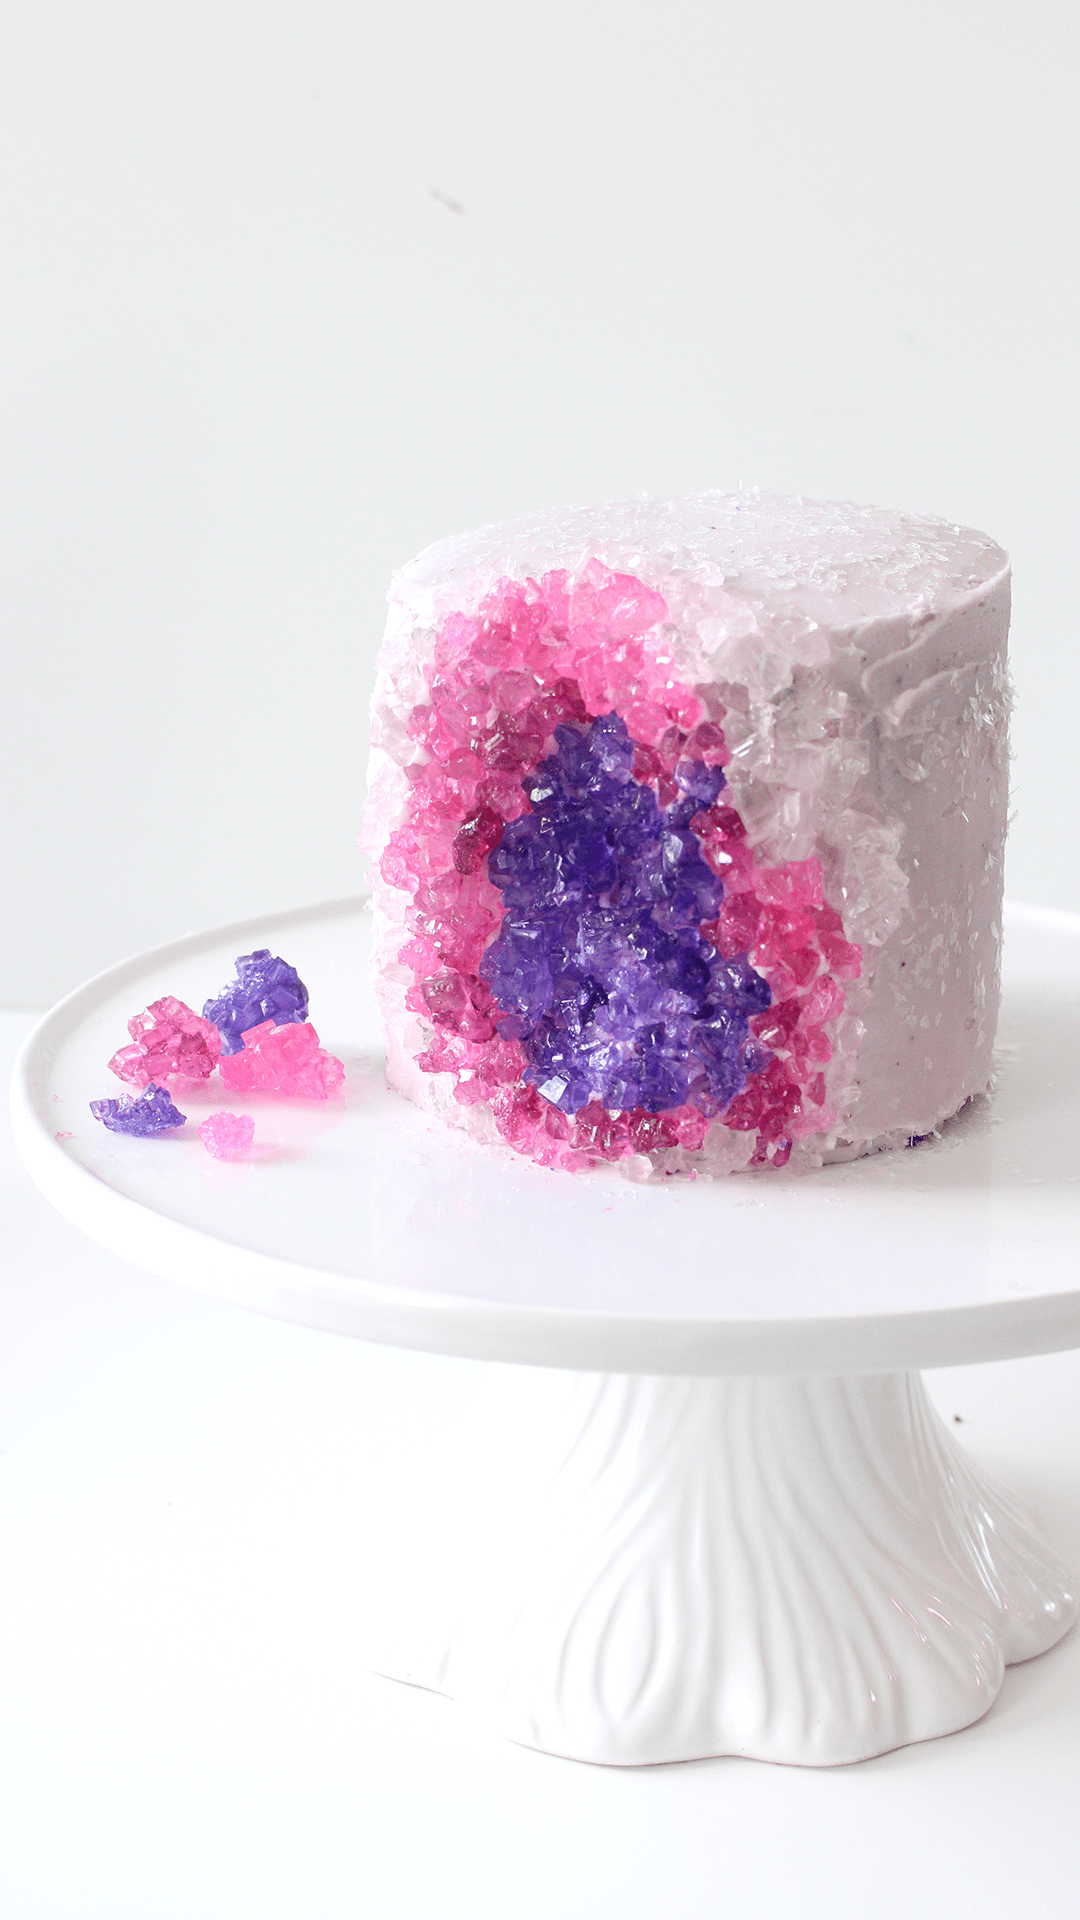 Amethyst Geode Cake - A delicious cherry and buttercream cake